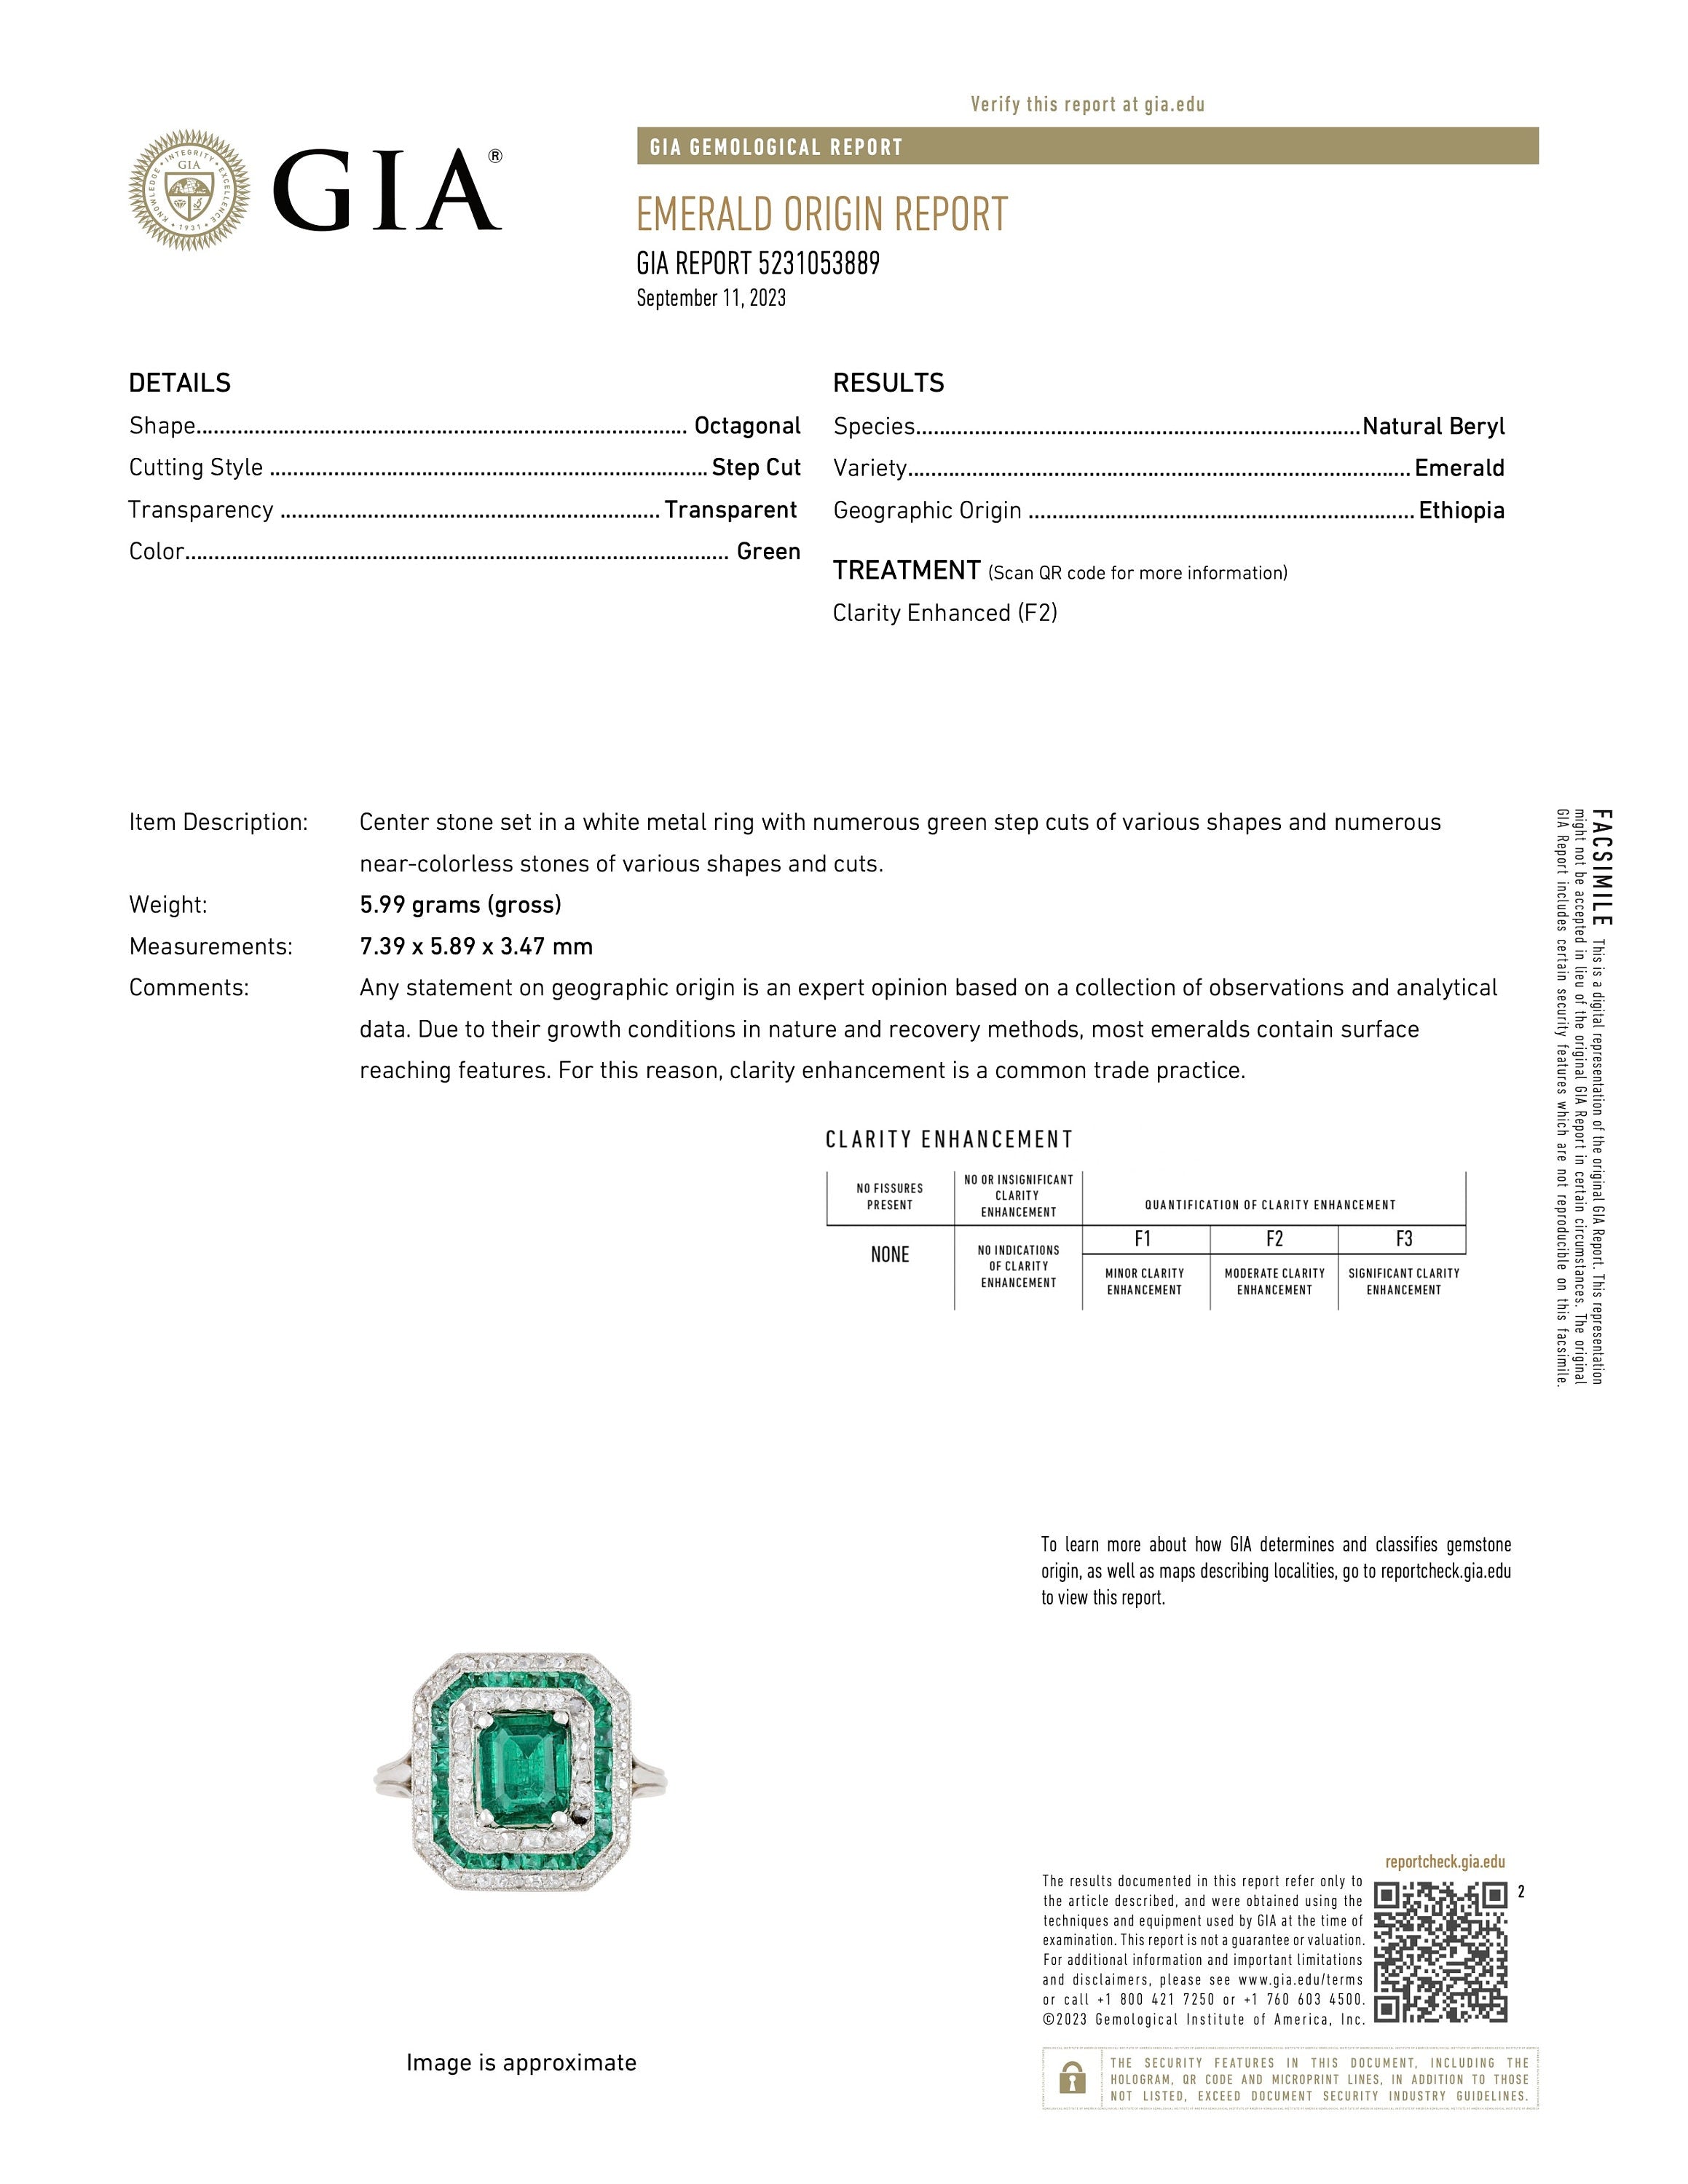 GIA Certified Emerald Cut Emerald in Platinum Art Deco Ring with Diamond and Emerald Double Octagonal Halo